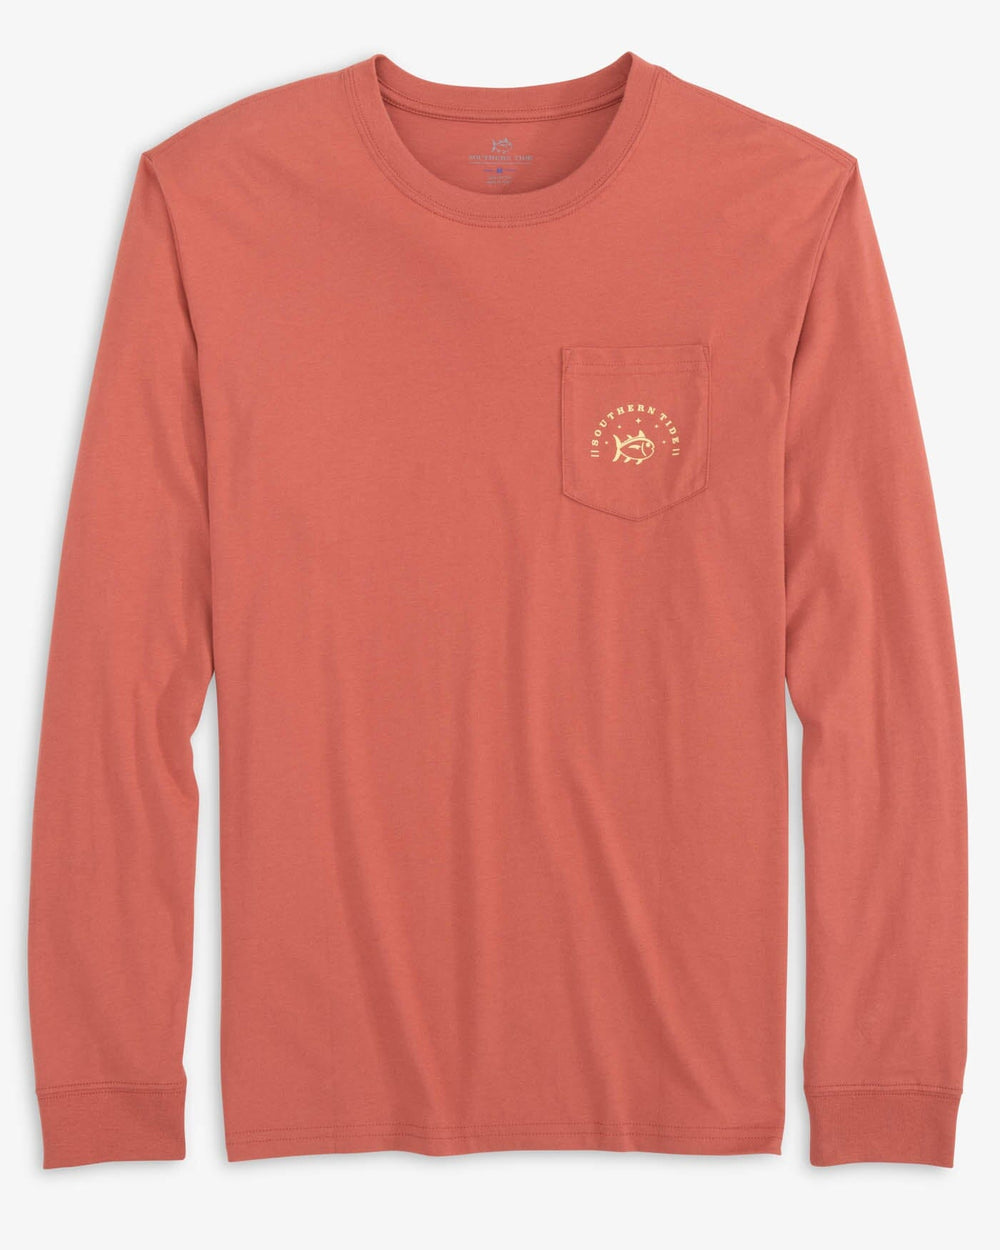 The front view of the Southern Tide Yuletide Classic Long Sleeve T-Shirt by Southern Tide - Dusty Coral